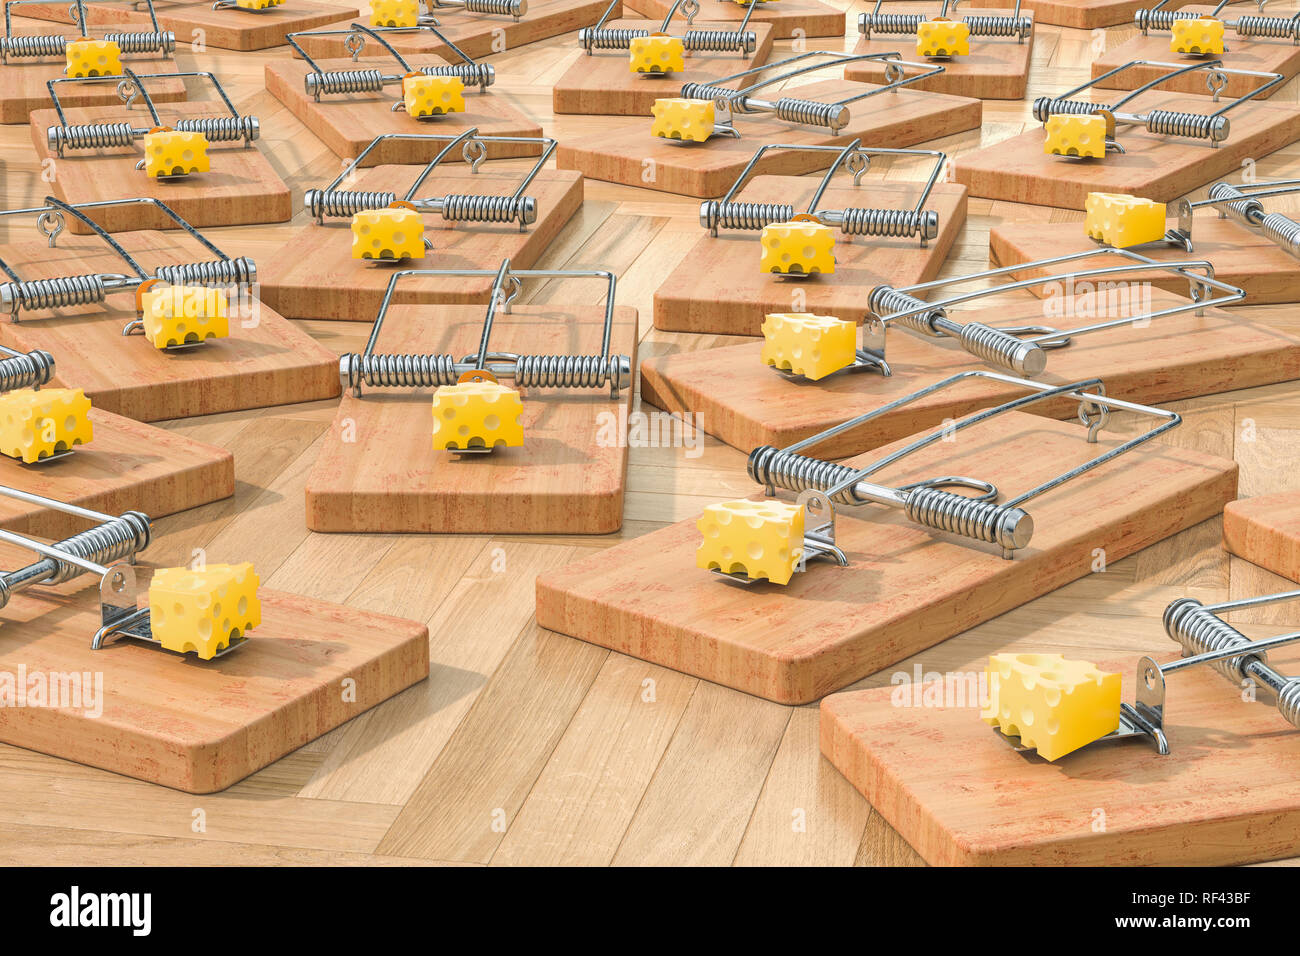 https://c8.alamy.com/comp/RF43BF/mouse-traps-with-cheese-on-the-floor-3d-rendering-RF43BF.jpg